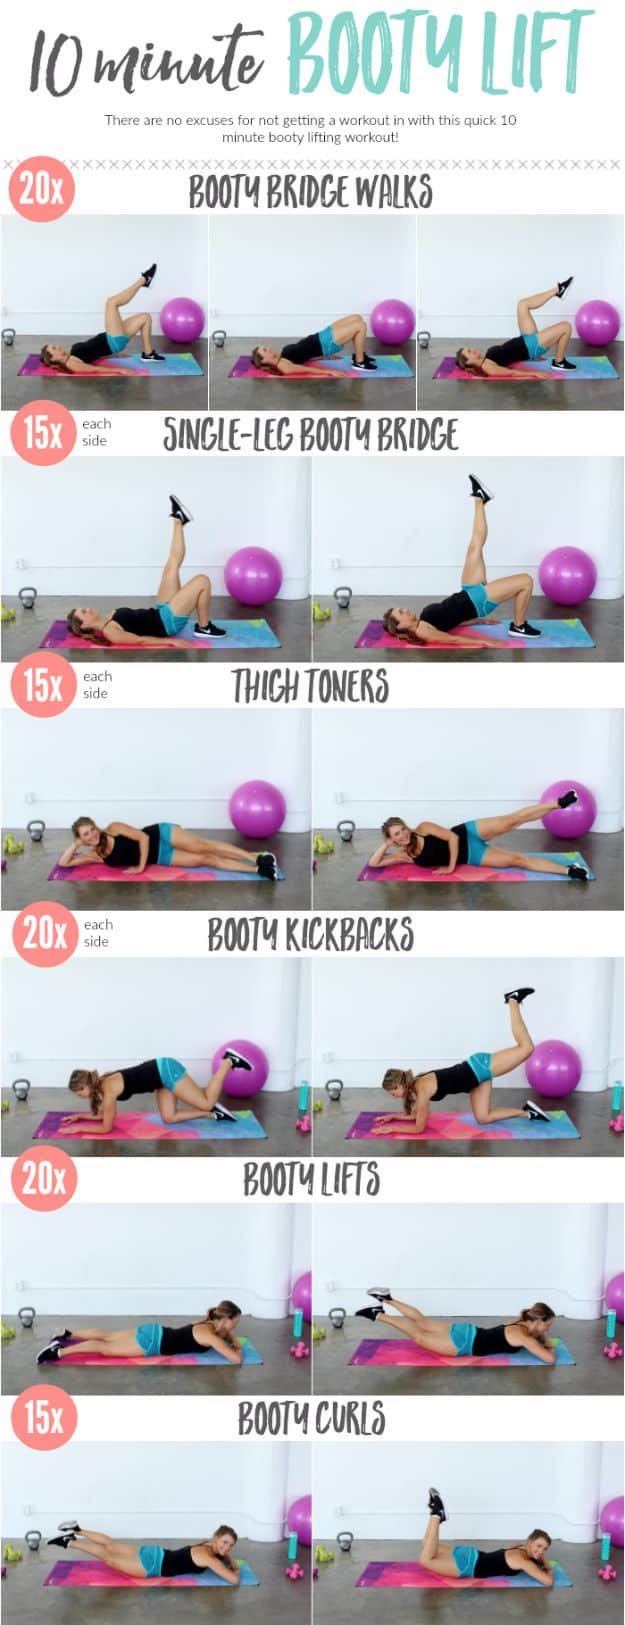 Best Quick At Home Workouts - 10 Minute Booty Lift - Easy Tutorials and Work Out Ideas for Strength Training and Exercises - Step by Step Tutorials for Butt Workouts, Abs Tummy and Stomach, Legs, Arms, Chest and Back - Fast 5 and 10 Minute Workouts You Can Do On Your Lunch Break, In Car, in Hotel #exercise #health